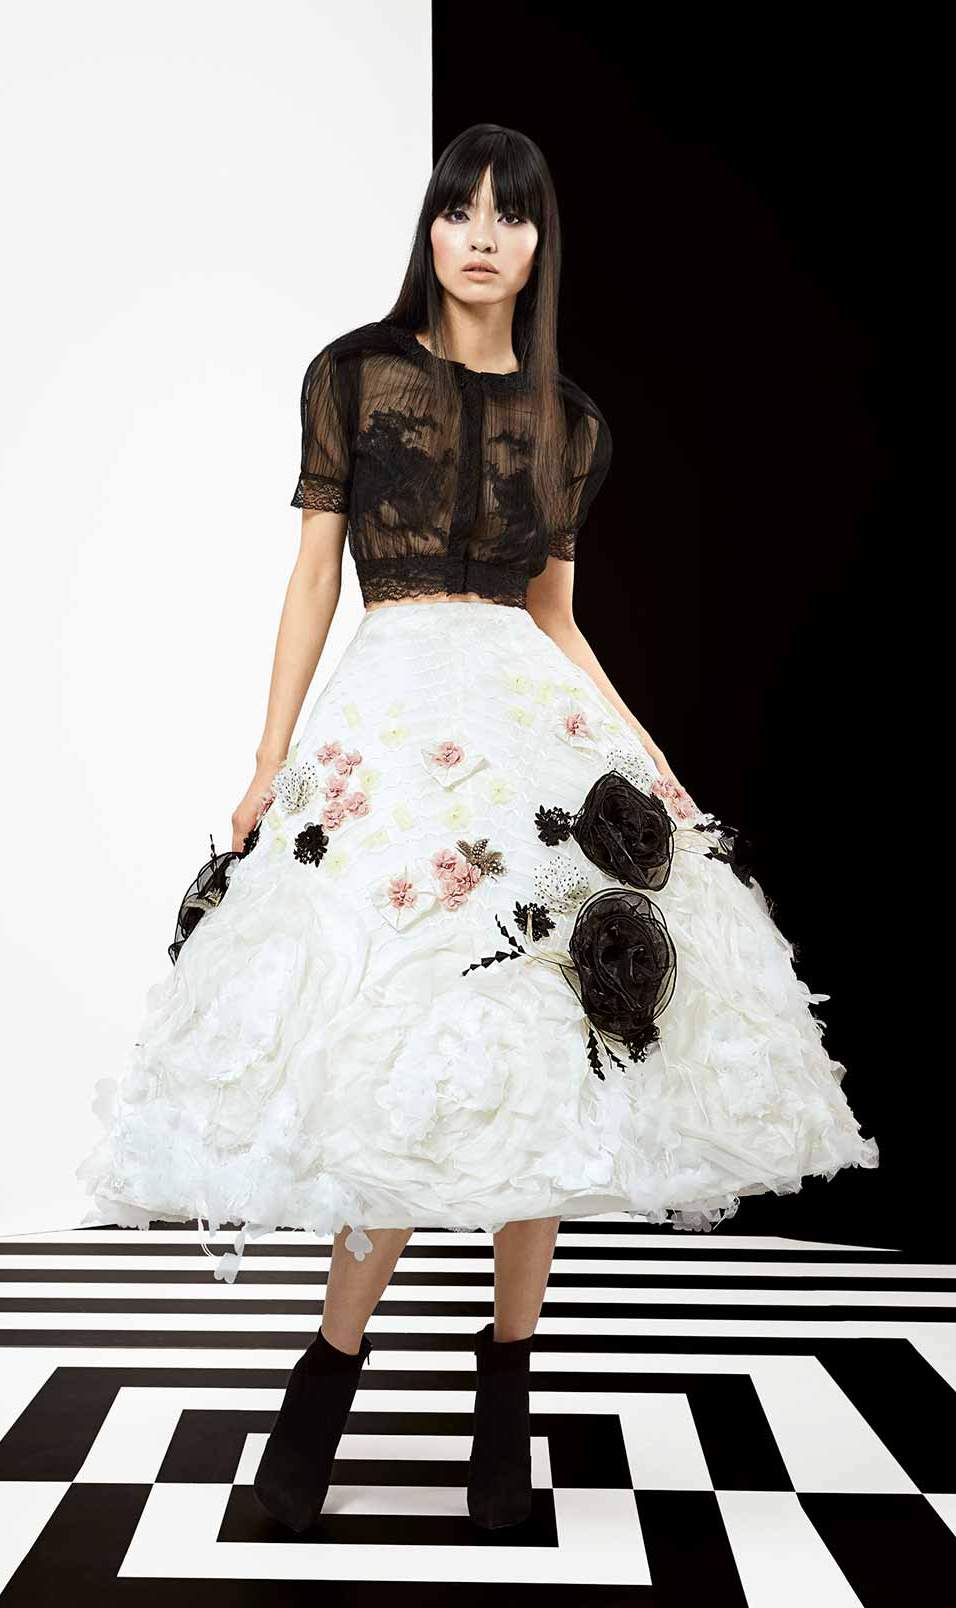 2 piece couture ensemble. Short slighly puffy sleeves black blouse and maxi white skirt with handmade pastel pink, silver and black floral appliques sewn by hand